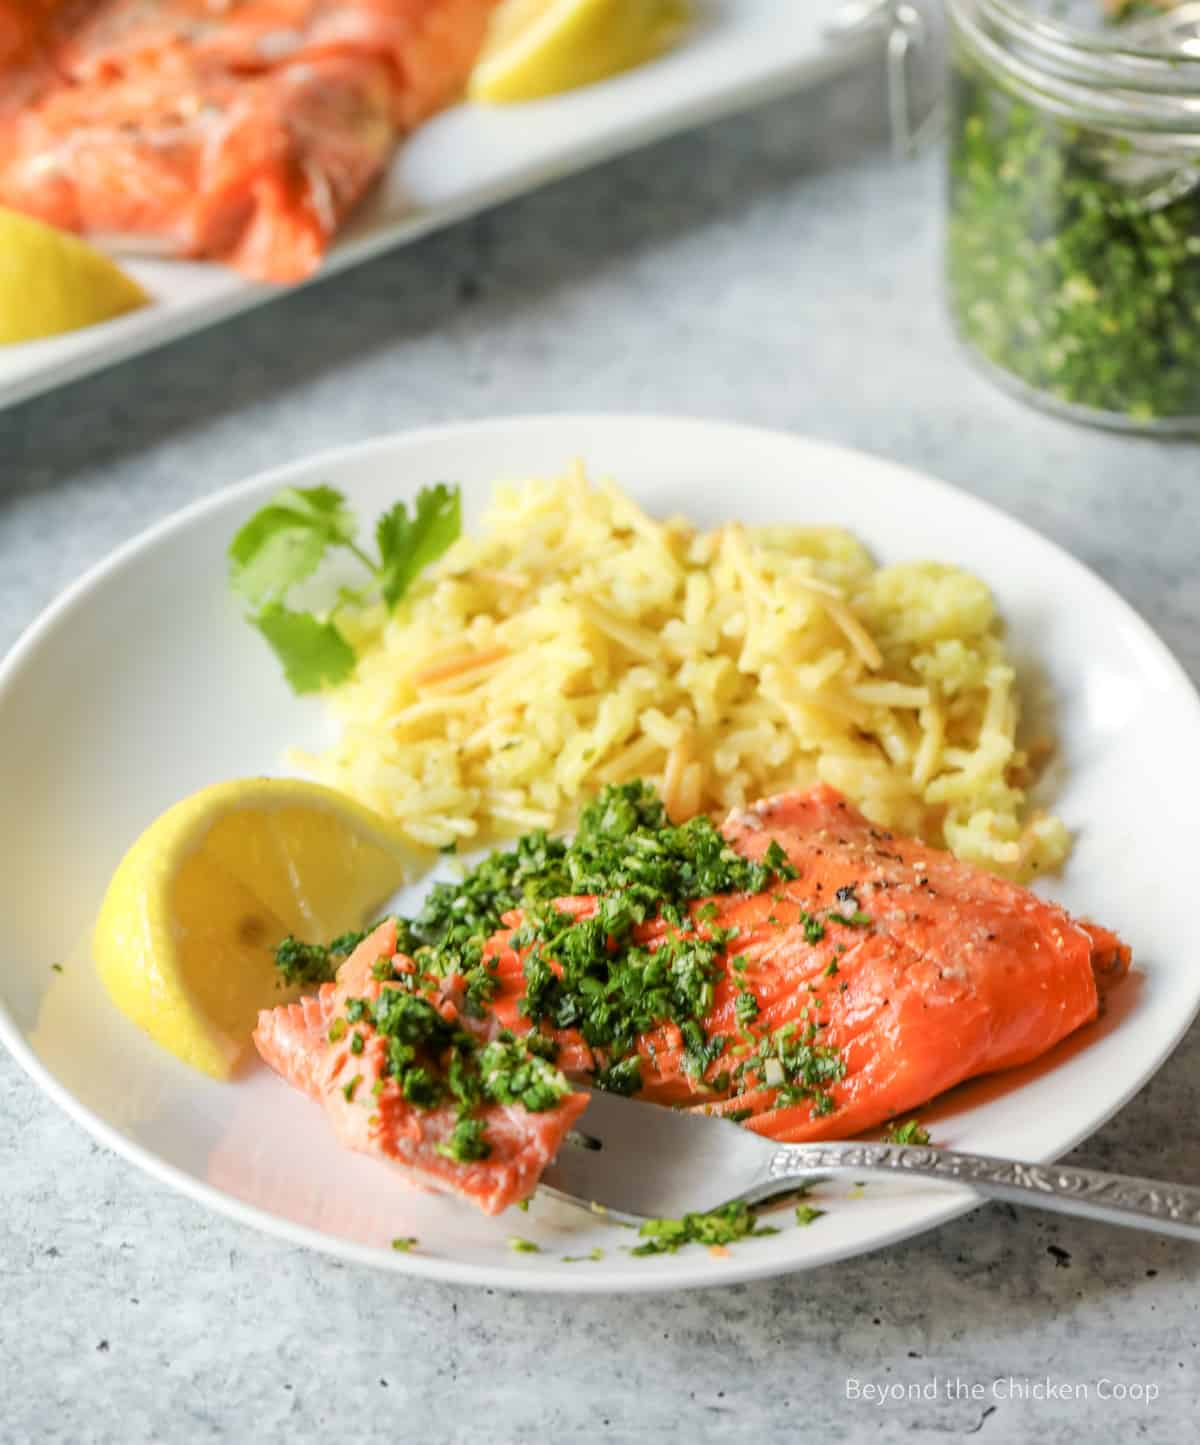 A plate with rice and salmon.